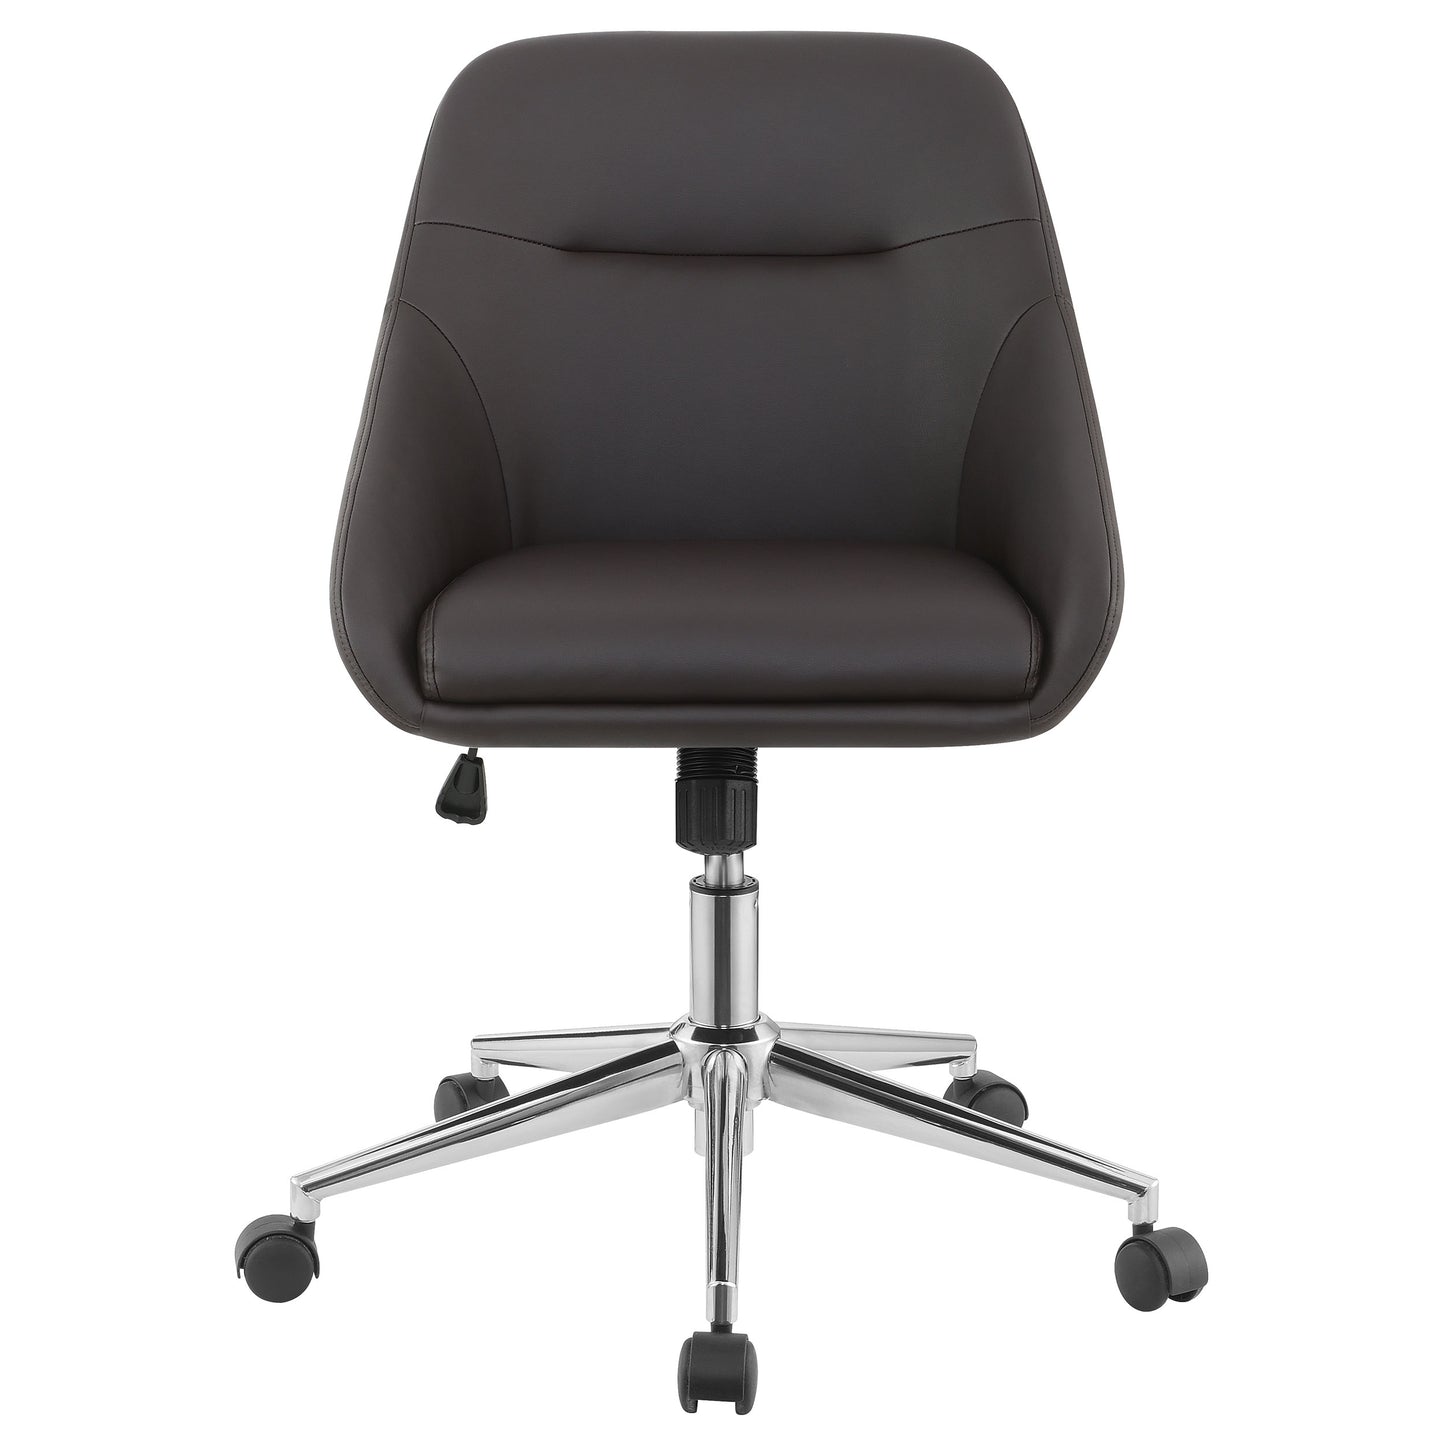 Jackman Upholstered Office Chair with Casters